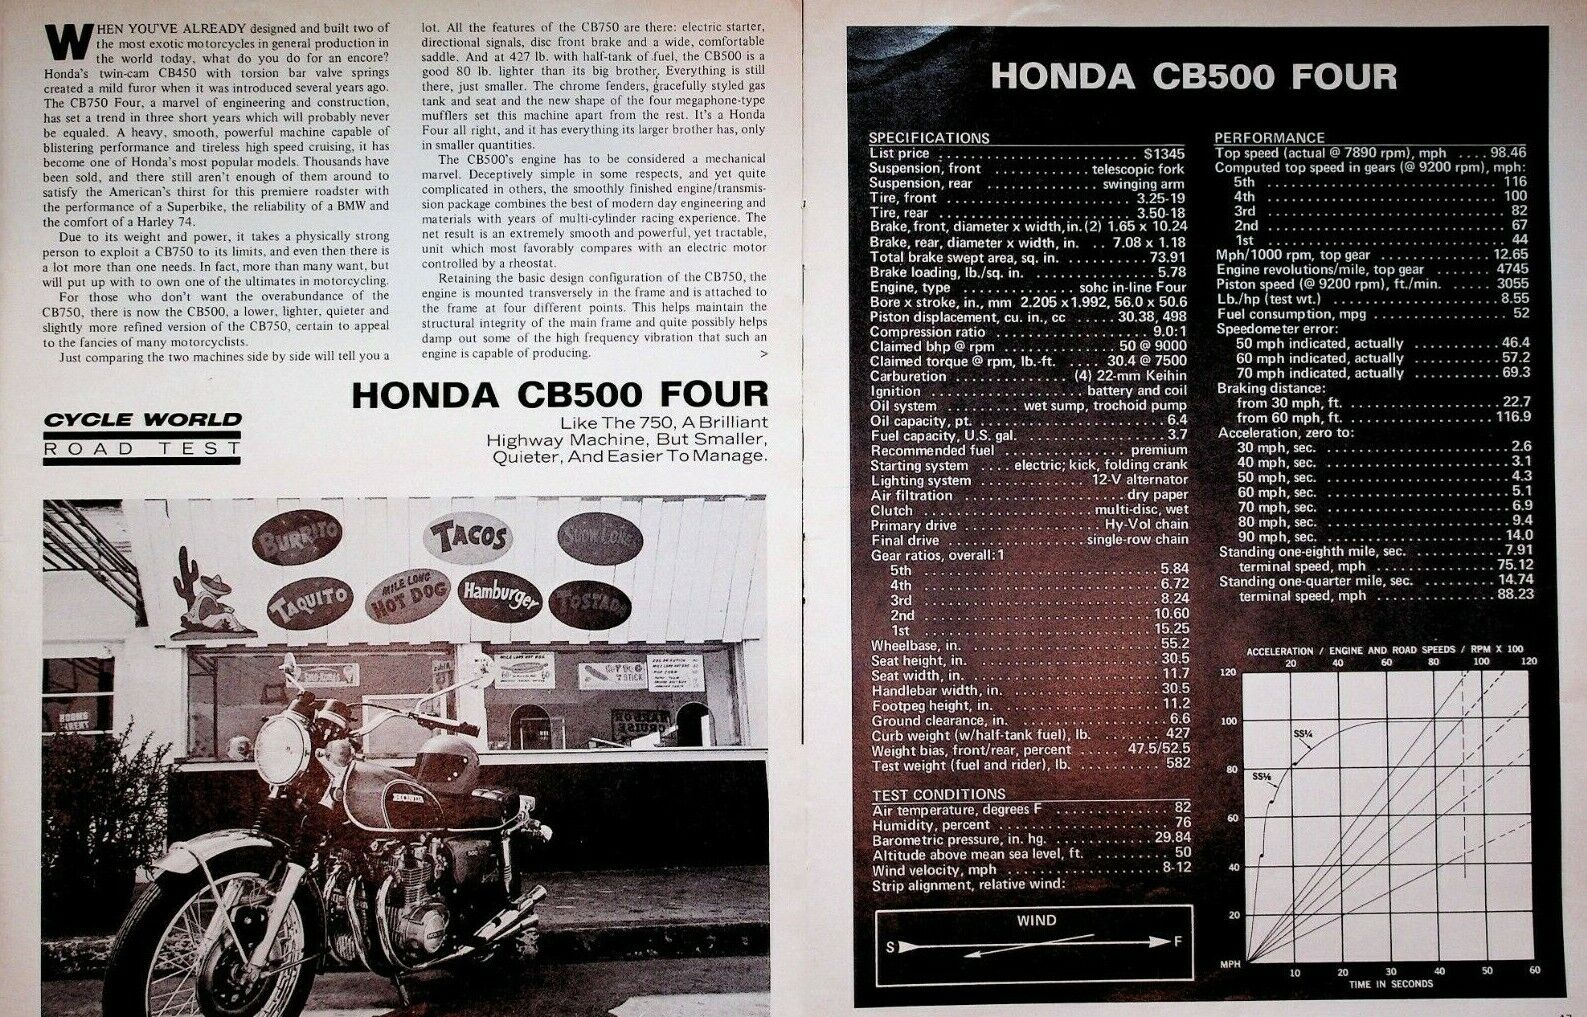 1971 Honda CB500 Four - 5-Page Vintage Motorcycle Road Test Article